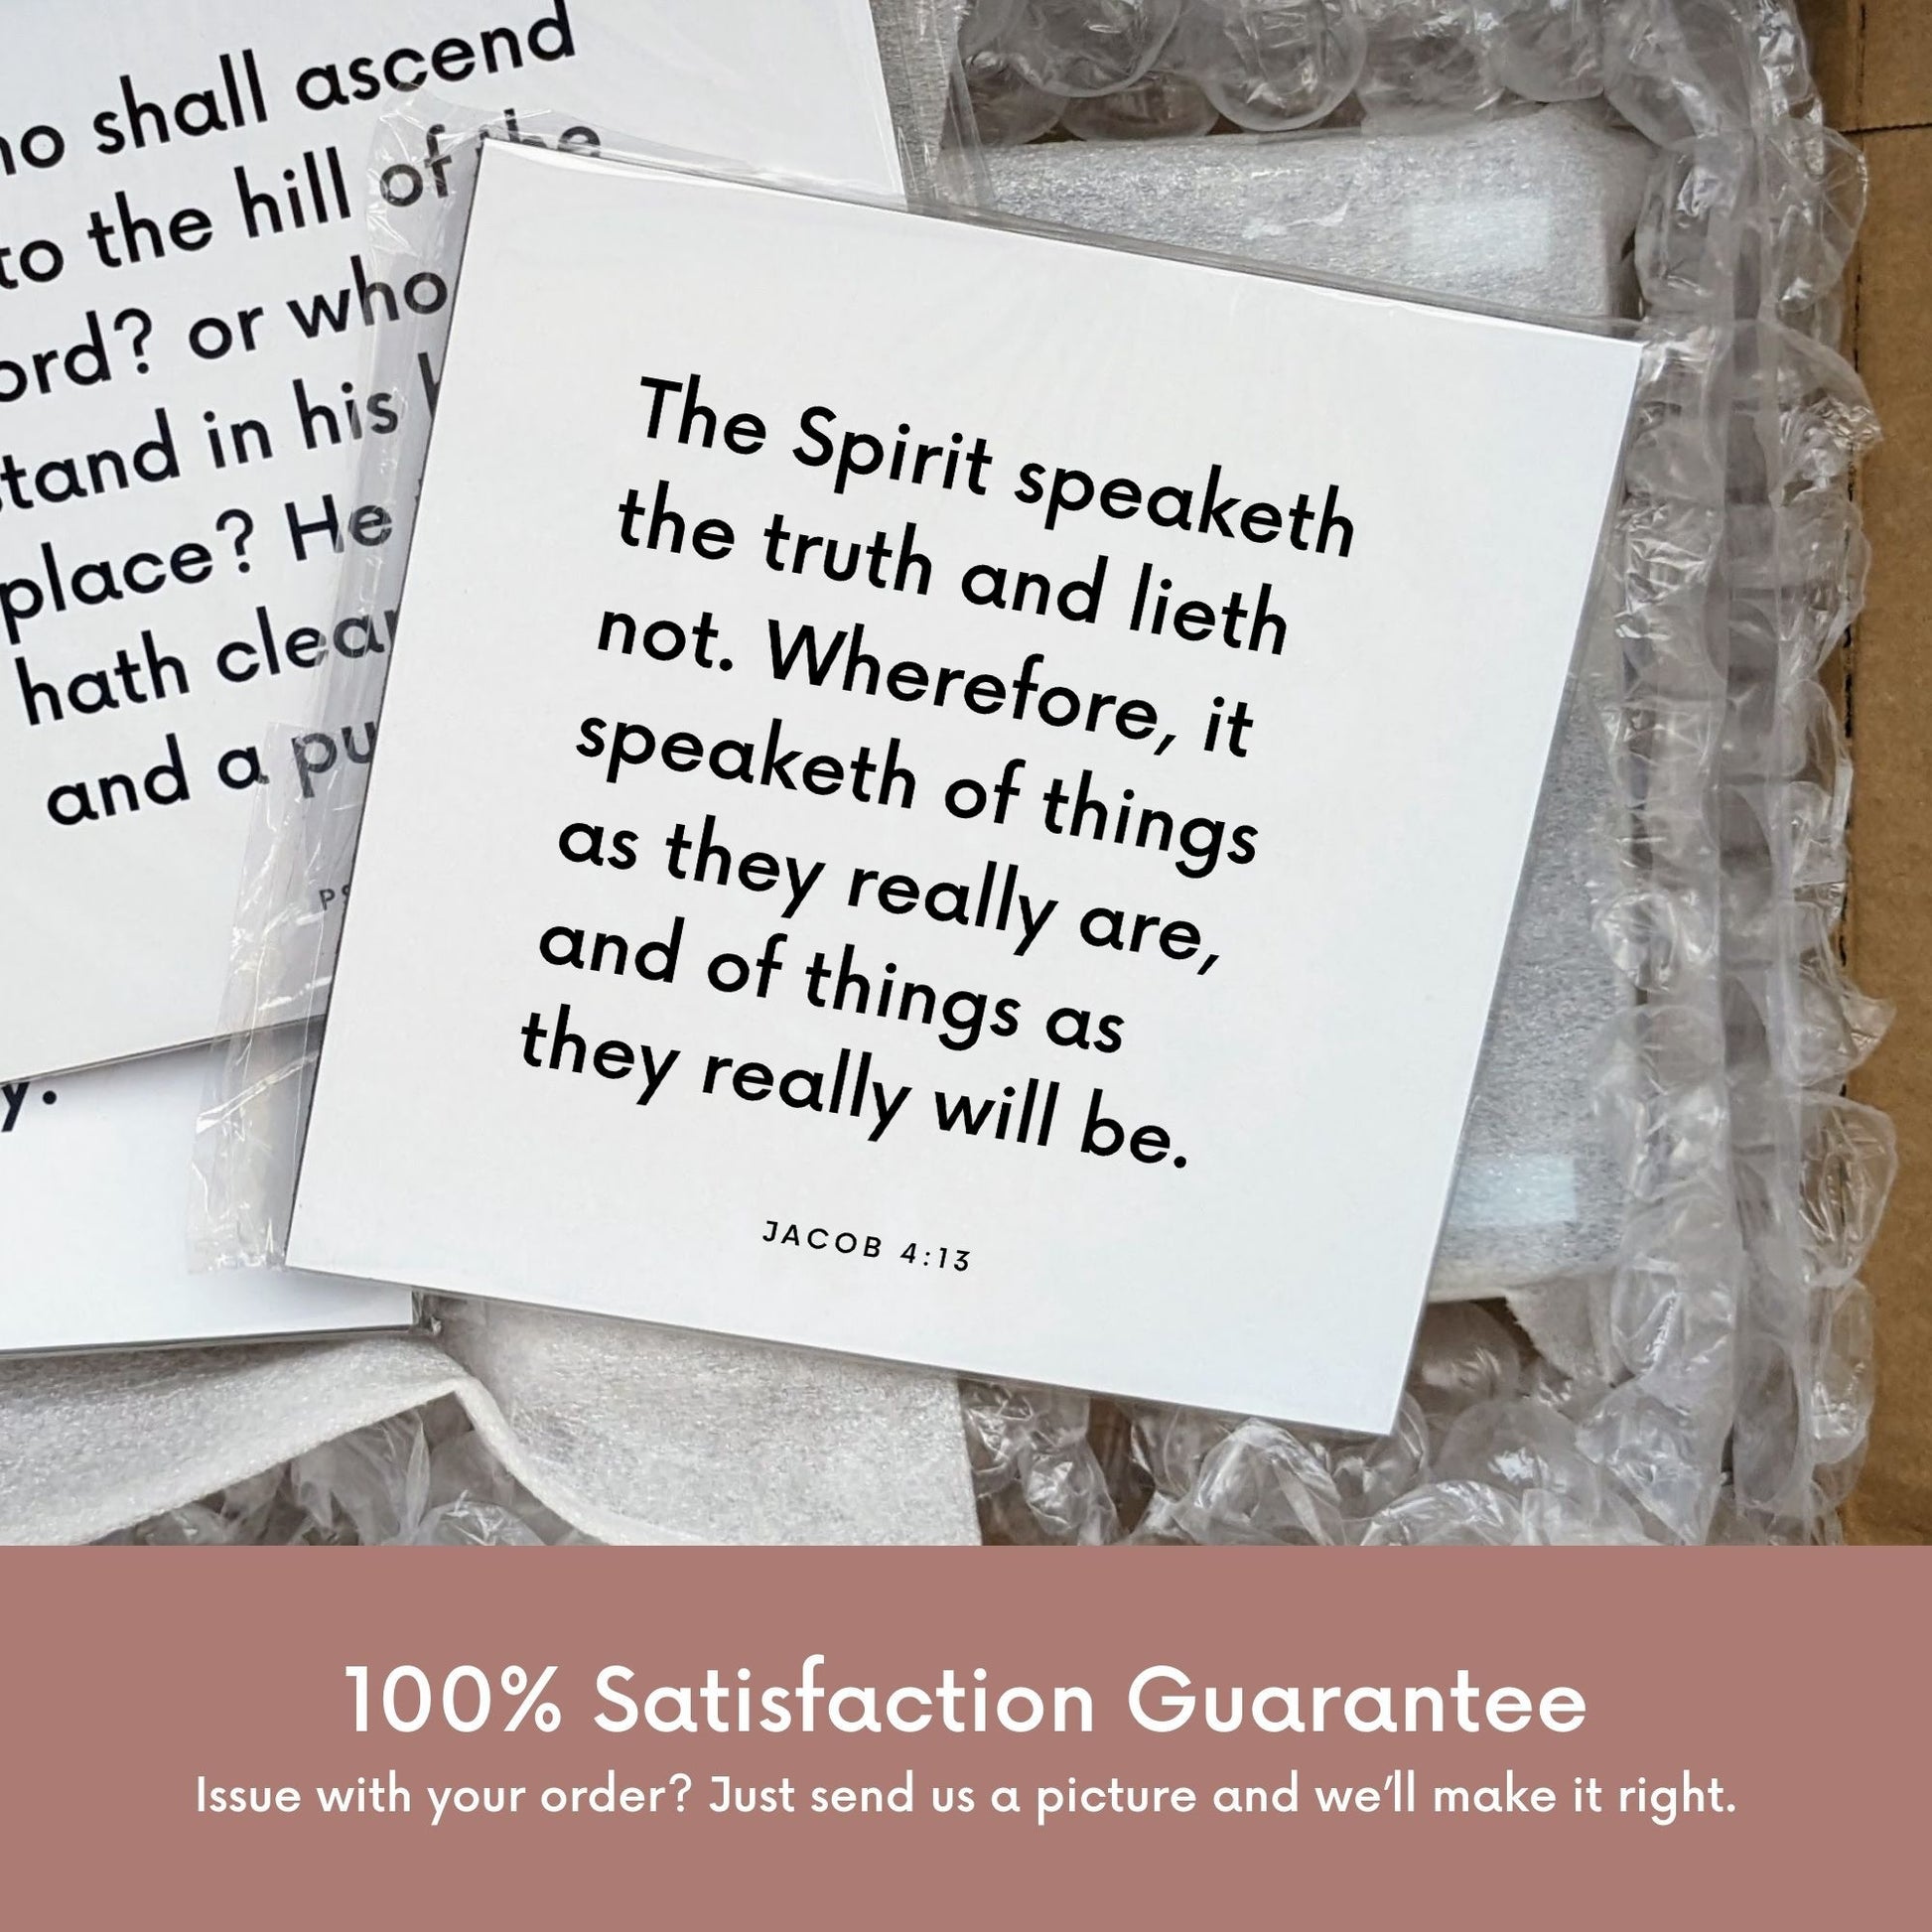 Shipping materials for scripture tile of Jacob 4:13 - "The Spirit speaketh the truth and lieth not"